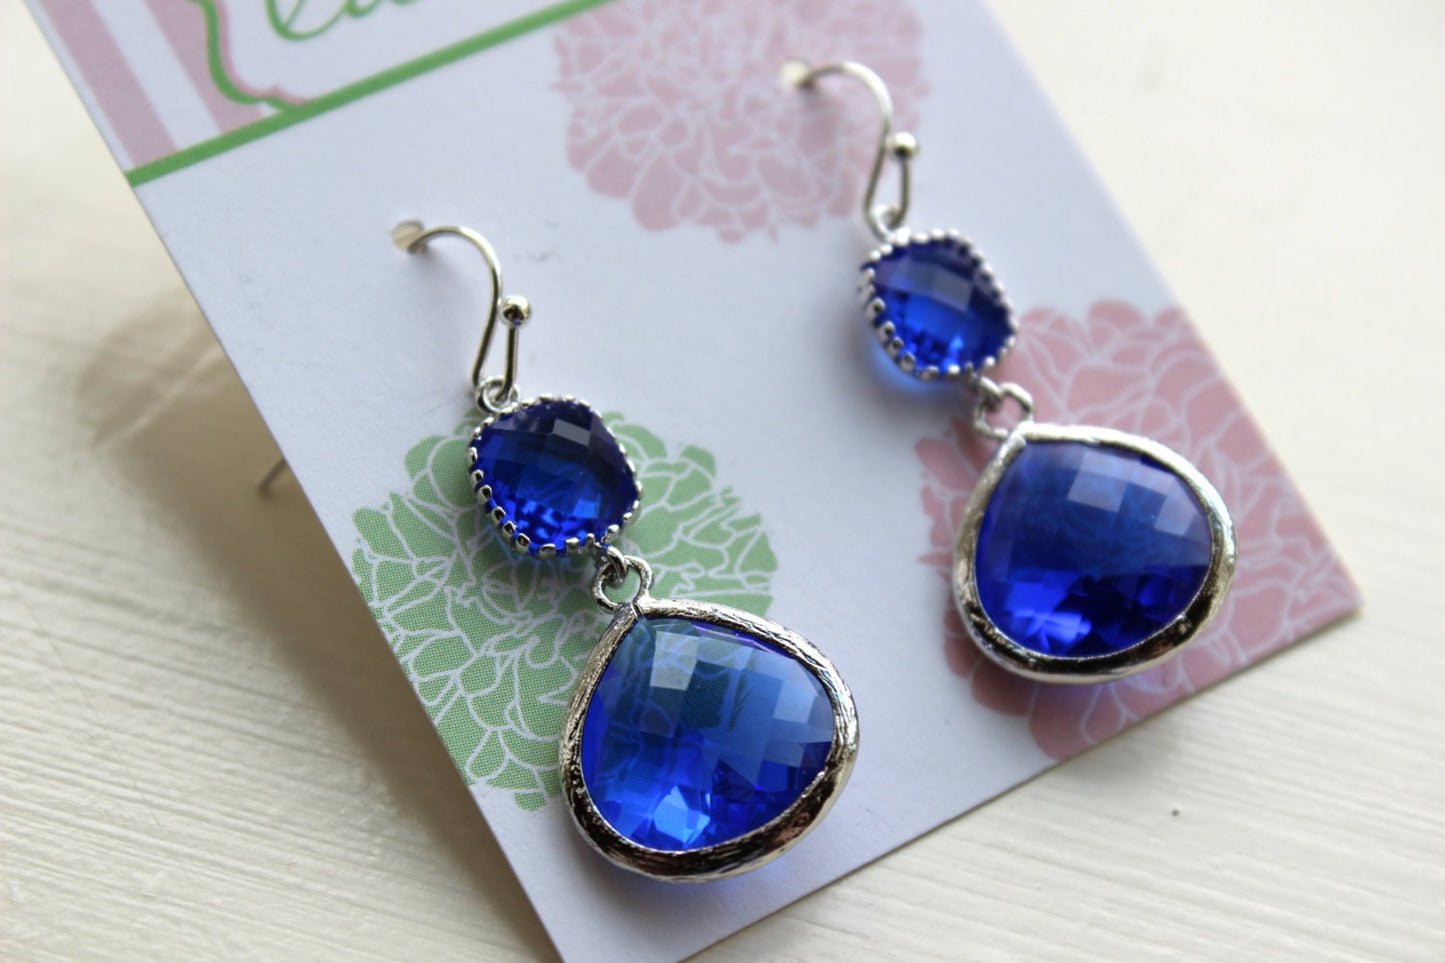 Silver Large Cobalt Blue Earrings Electric Blue Jewelry - Two Tiered Earrings Cobalt Blue Bridesmaid Jewelry Something Blue Wedding Jewelry